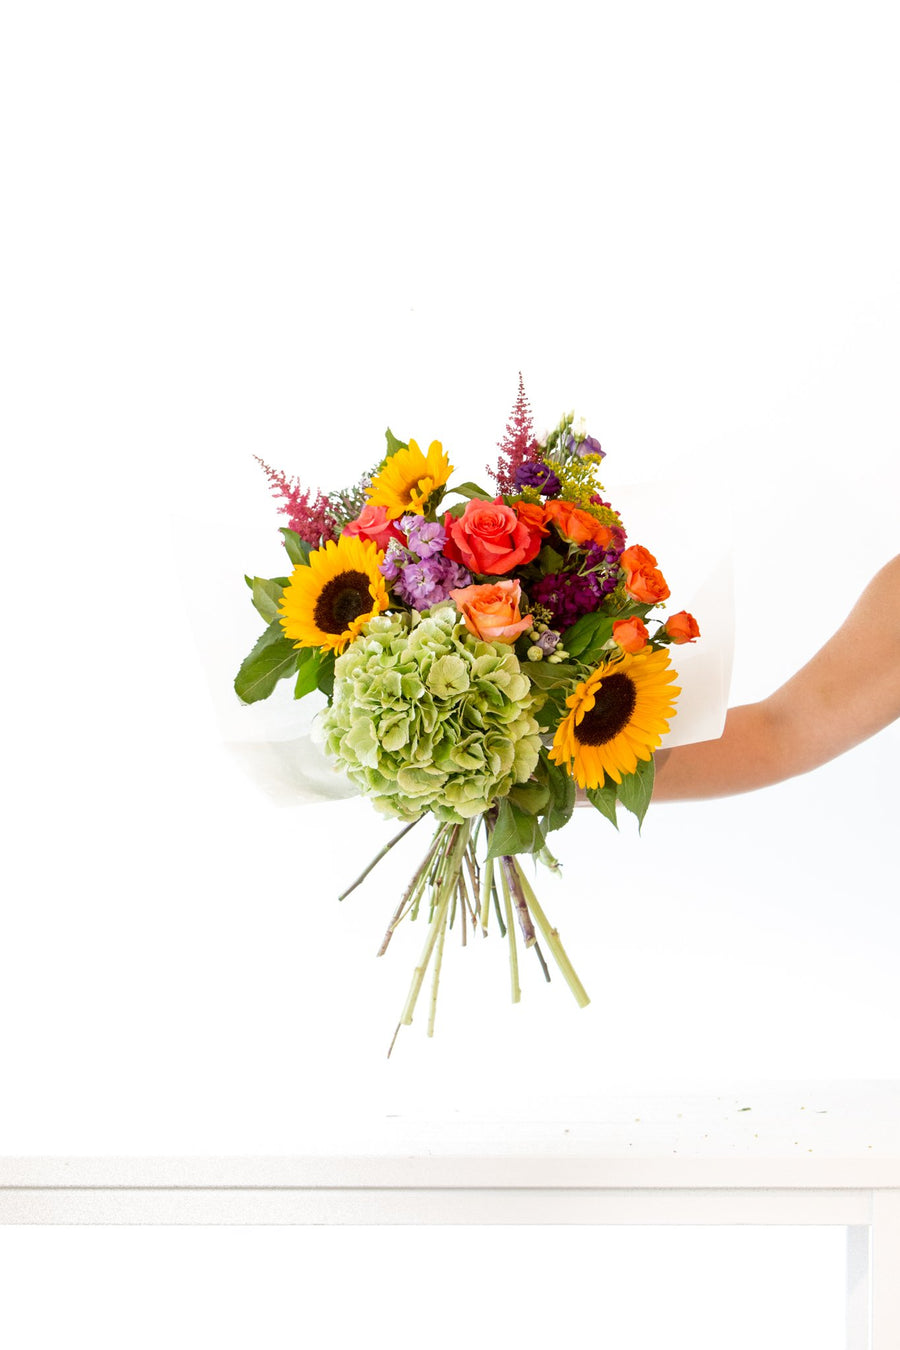 Floral subscription Bright and Colorful handed bouquet - large $100